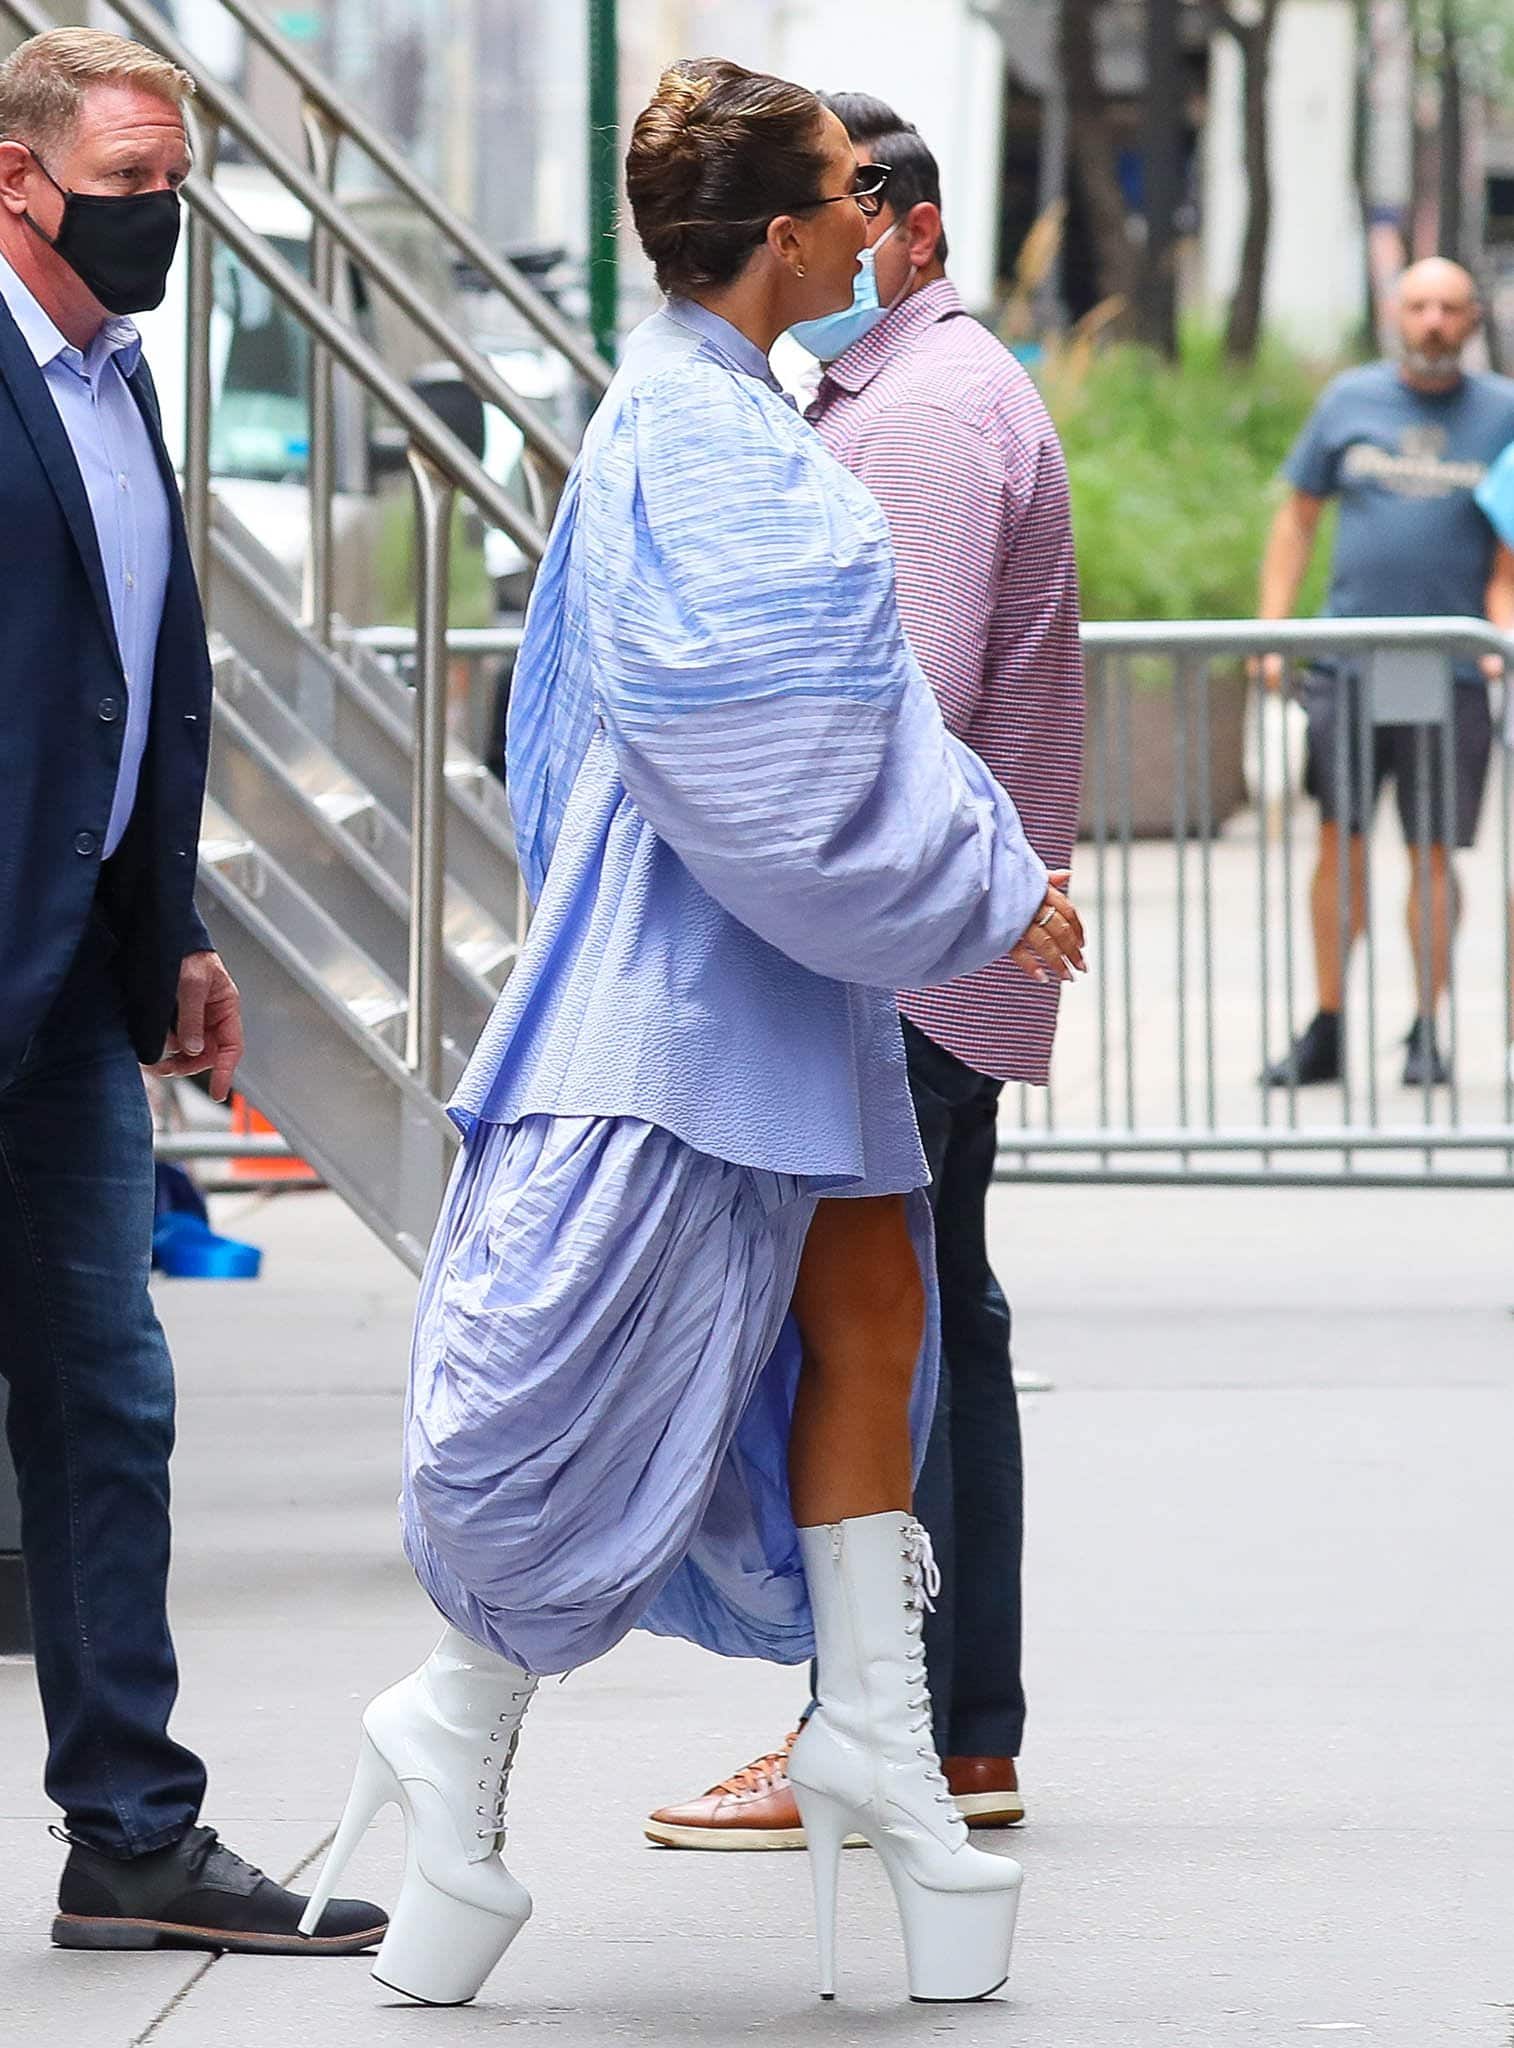 Lady Gaga looks avant-garde in her Loewe periwinkle blue dress with billowing sleeves and a bubble skirt